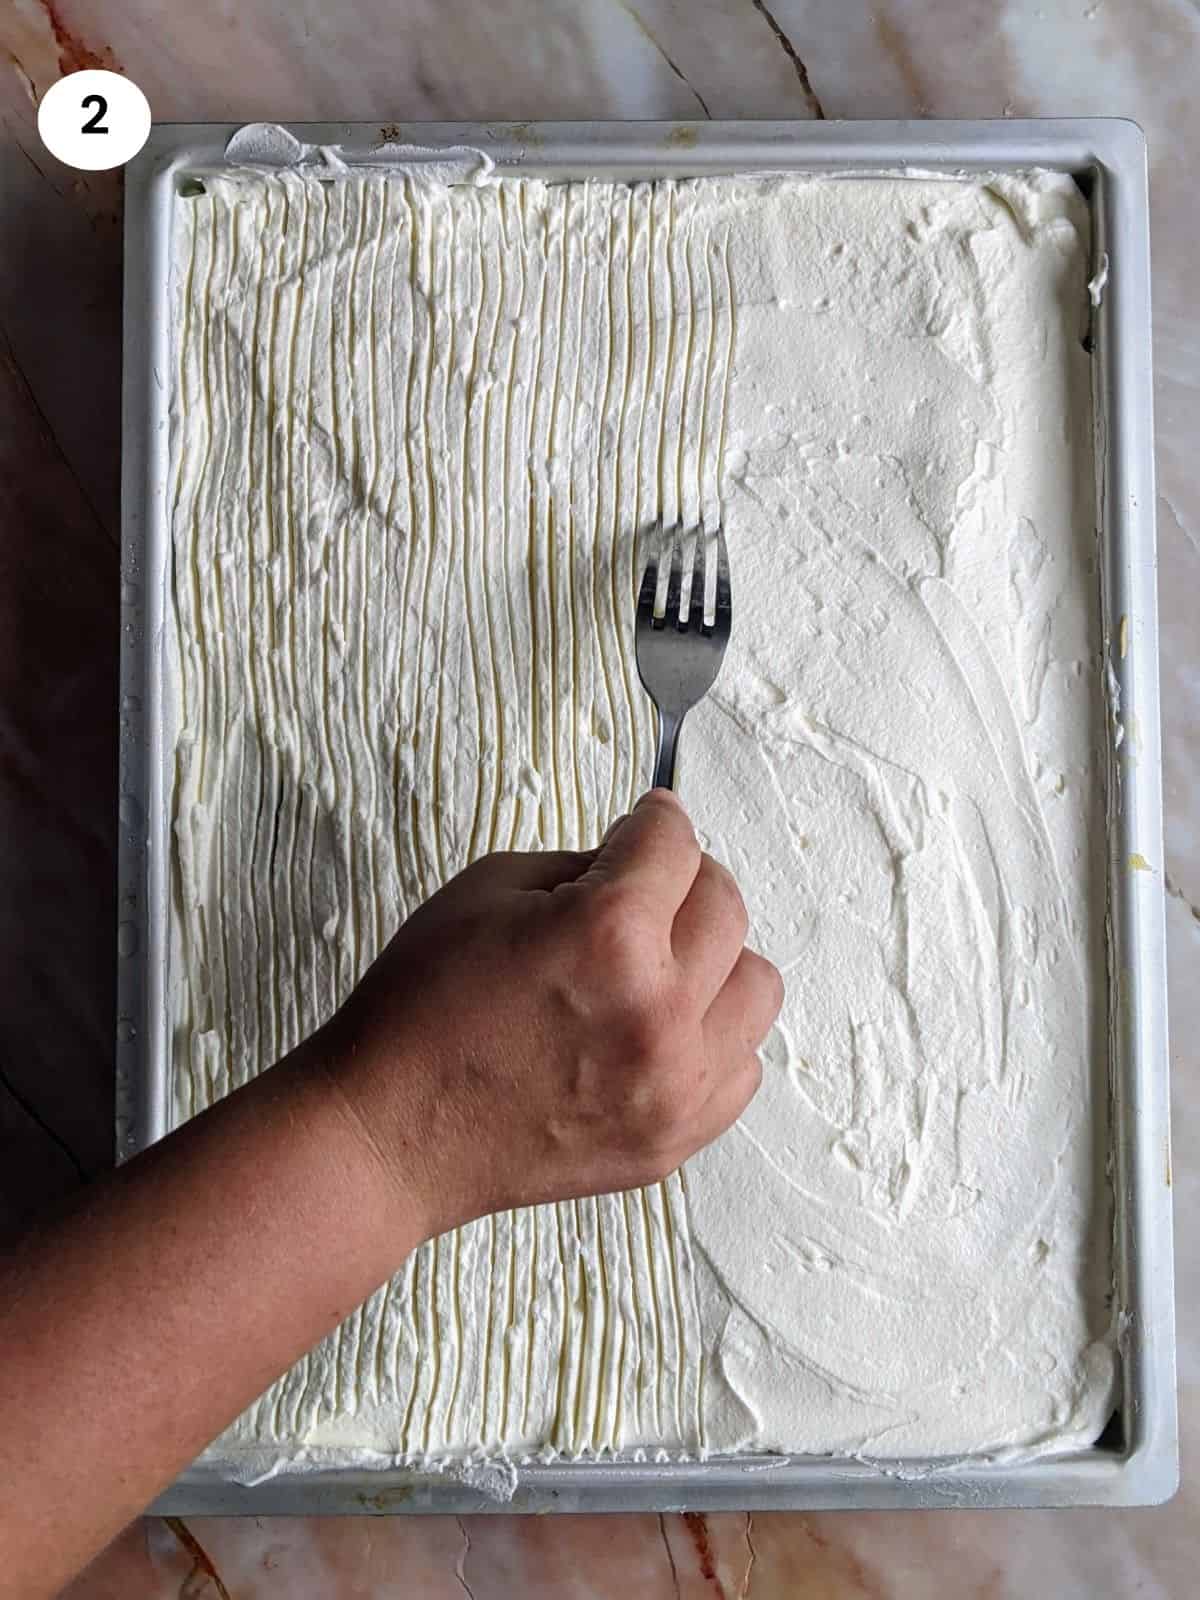 Scoring the whipped cream layer with a fork.